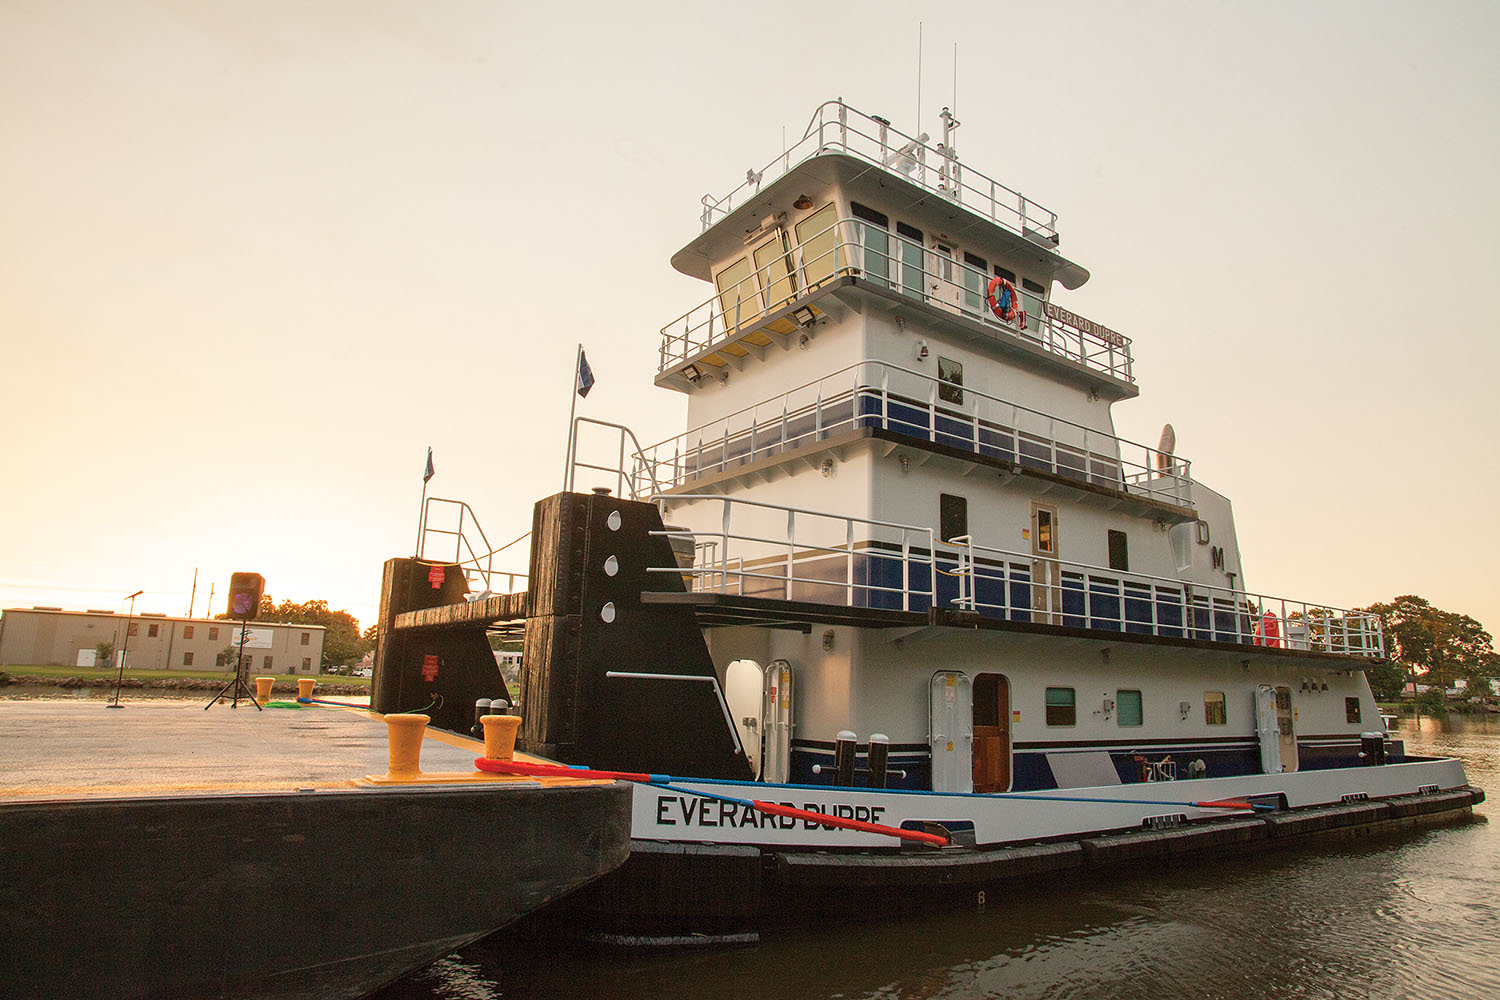 The mv. Everard Dupre was built by Intracoastal Iron Works in Bourg, La. (Photo by Frank McCormack)